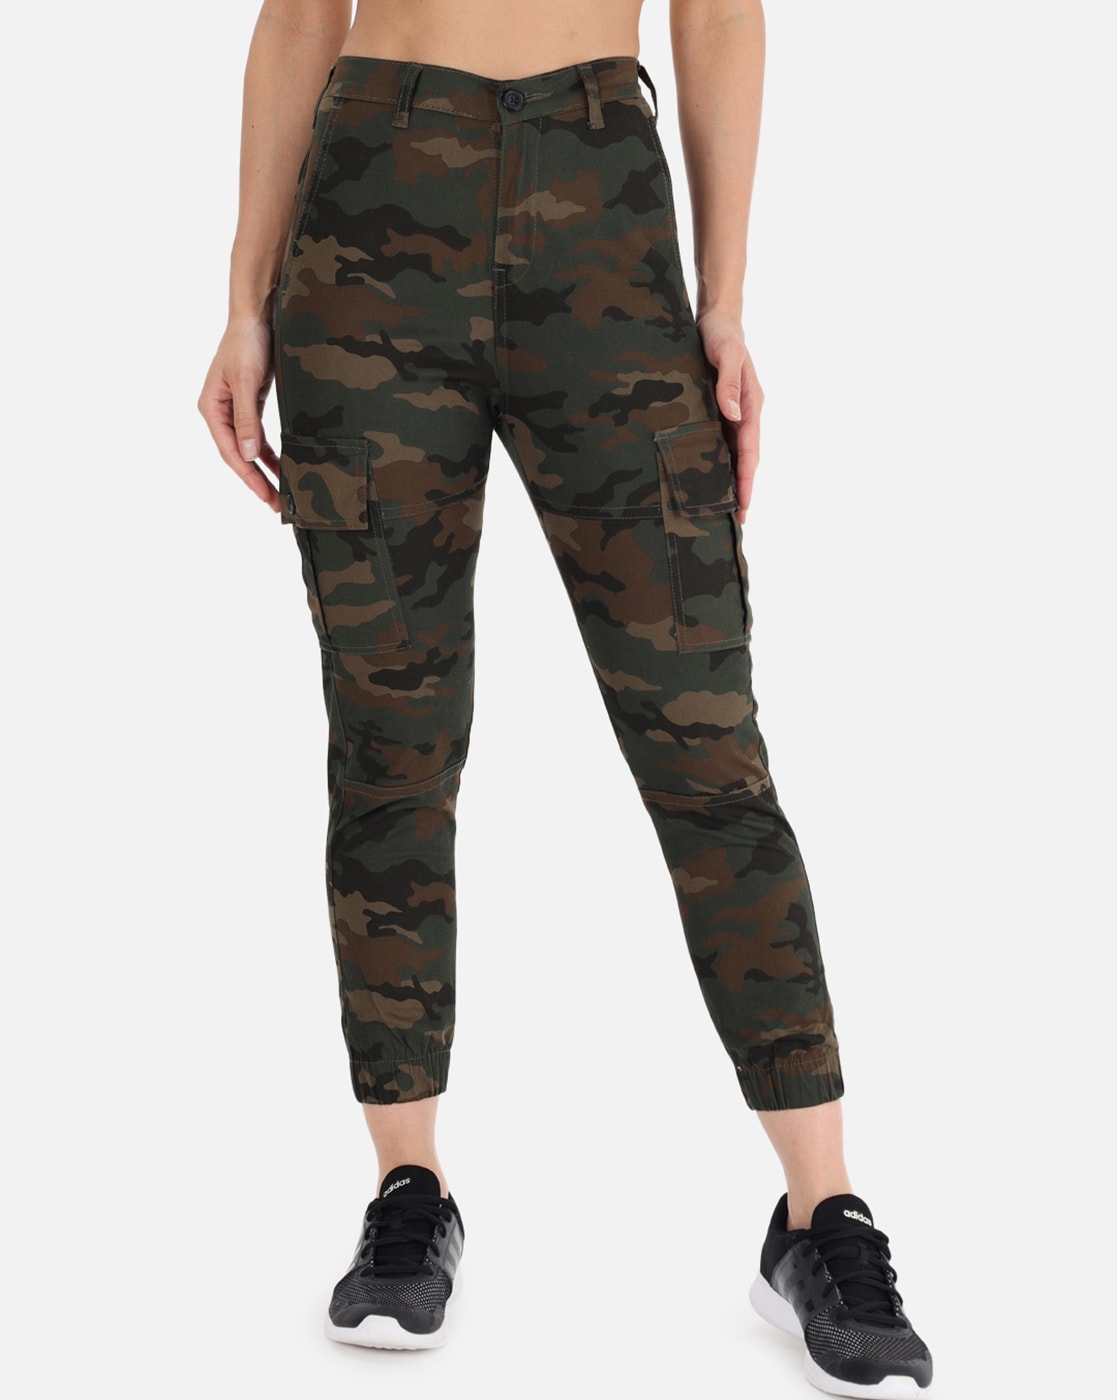 Camouflage Cargo Pants Women  Baggy Camouflage Pants Women  Y2k Clothes  Straight  Aliexpress